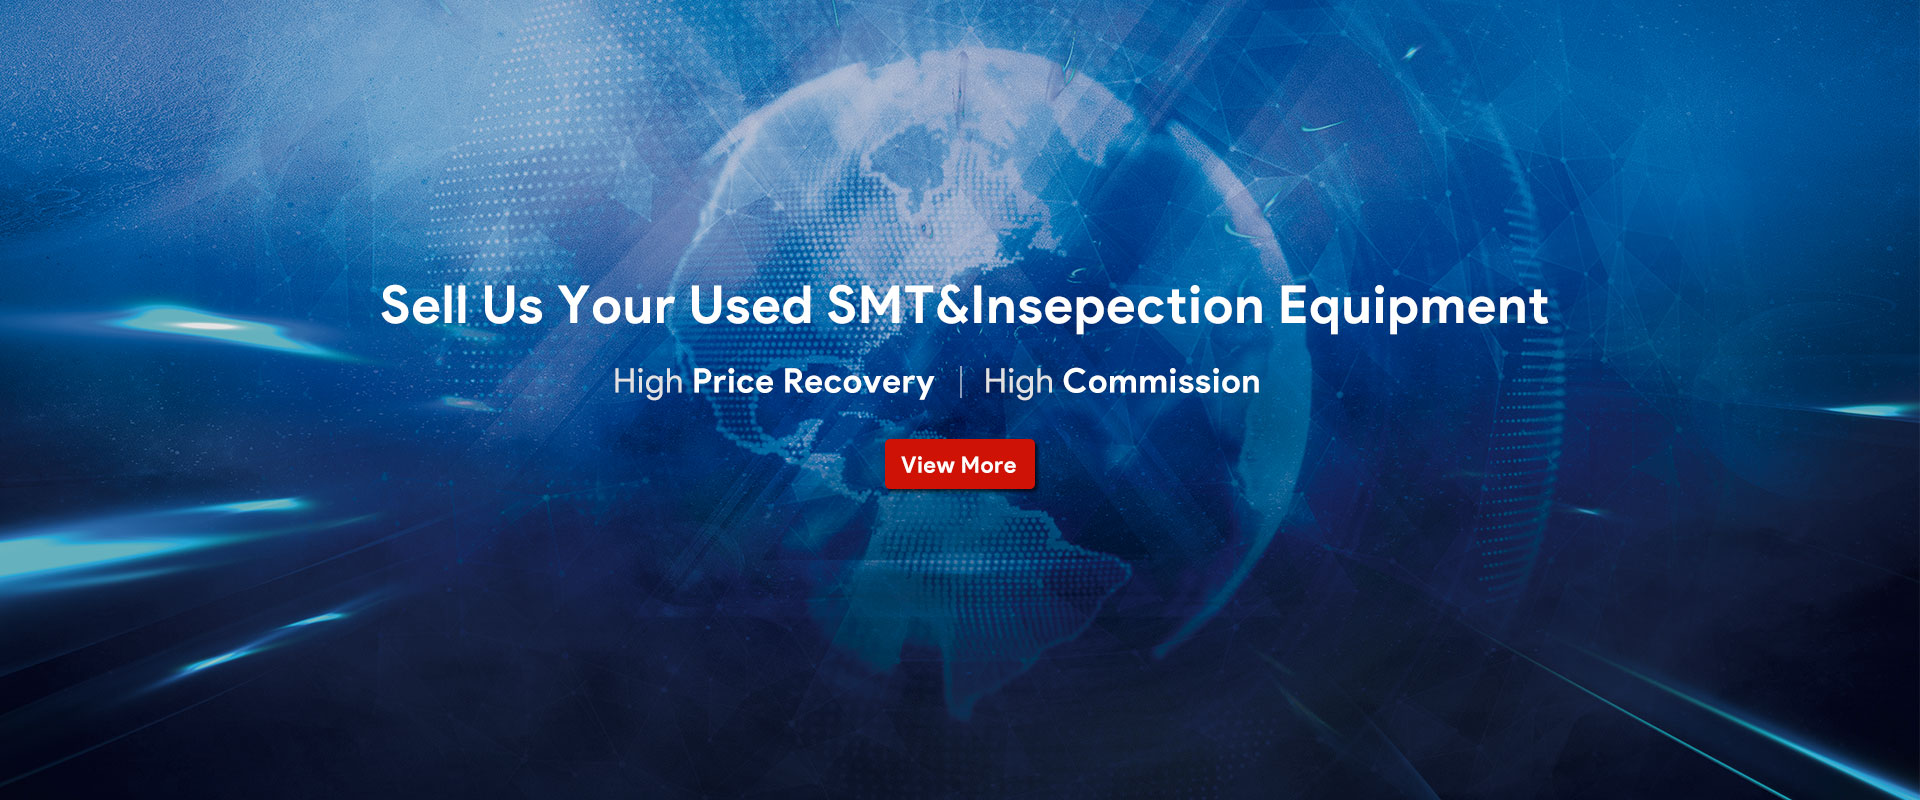 Sell Us Your Used SMT&Insepection Equipment